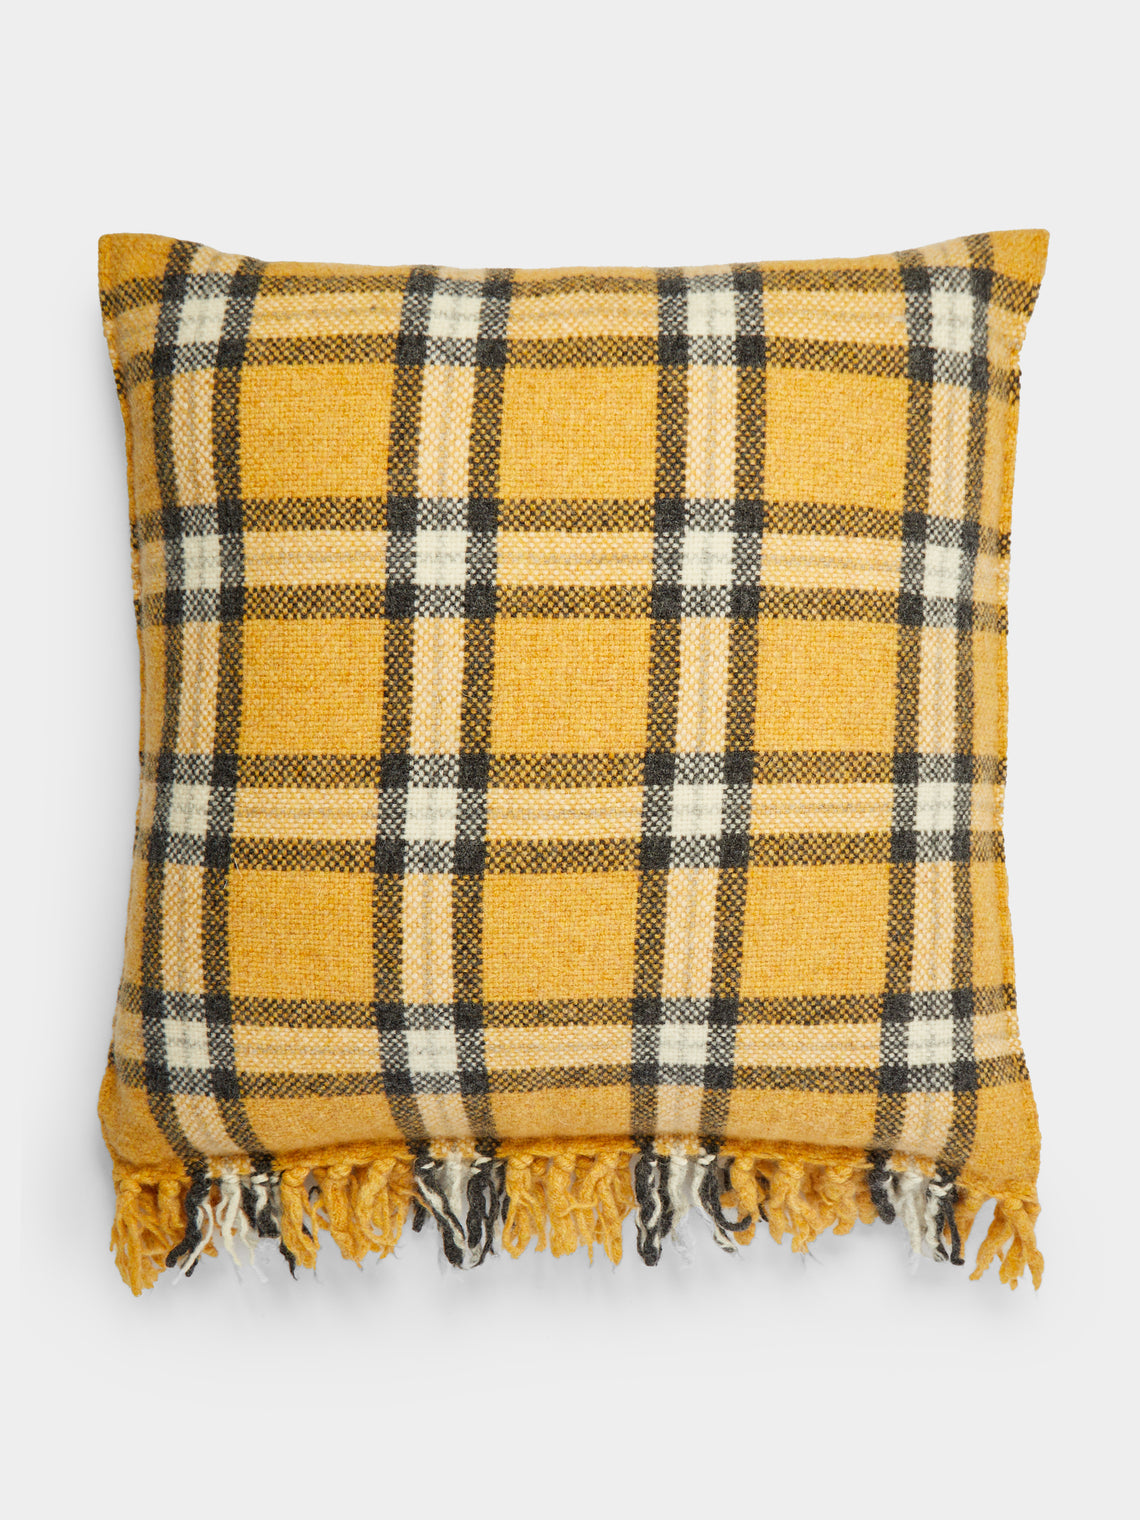 Hollie Ward - Archthine Handwoven Shetland Wool Check Cushion -  - ABASK